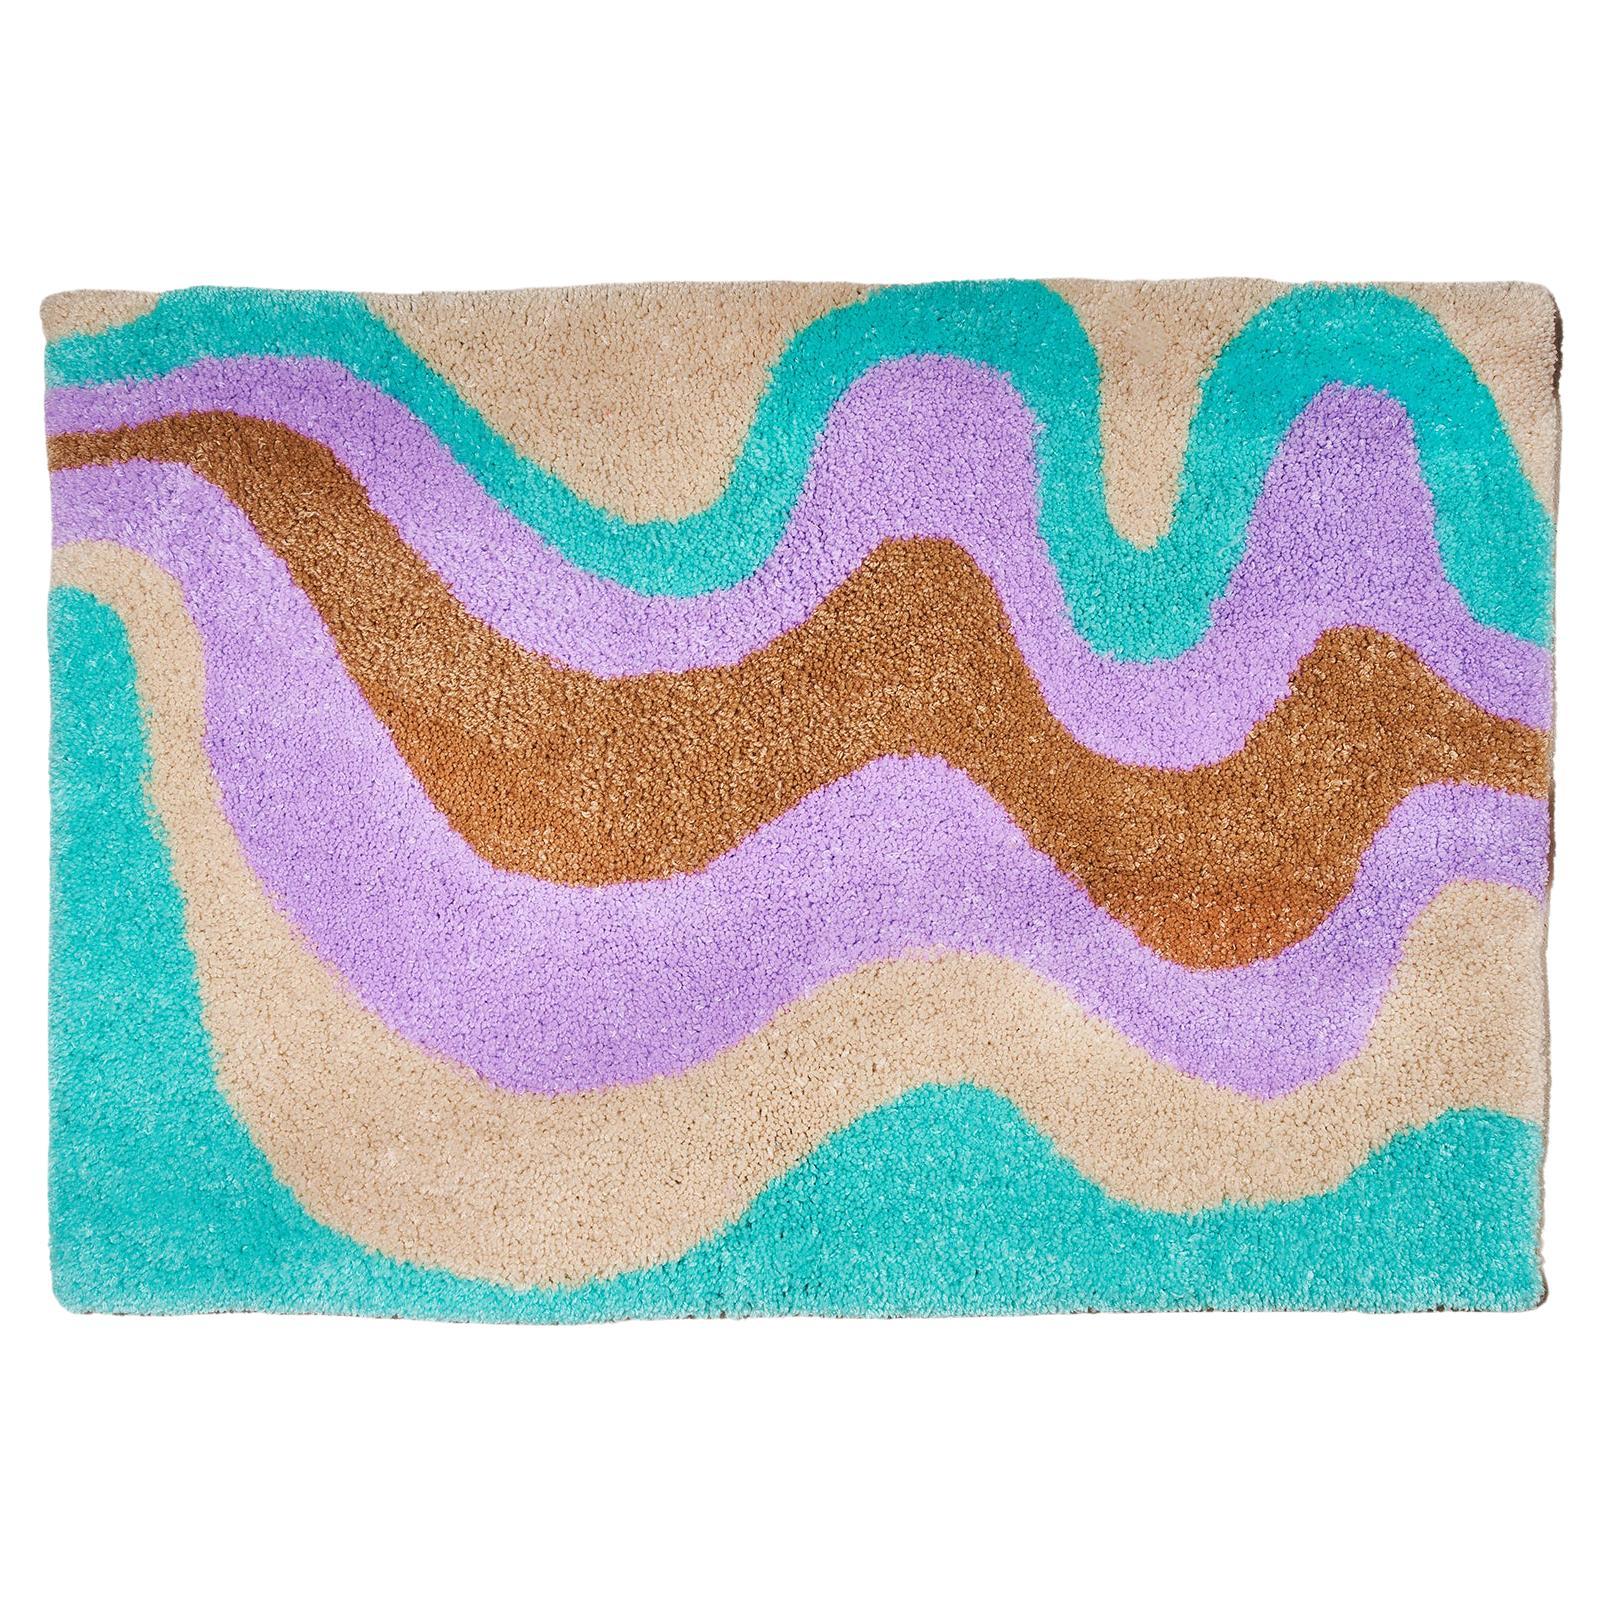 Hand Tufted Lavender, White, Teal, Brown Wavy Rug For Sale